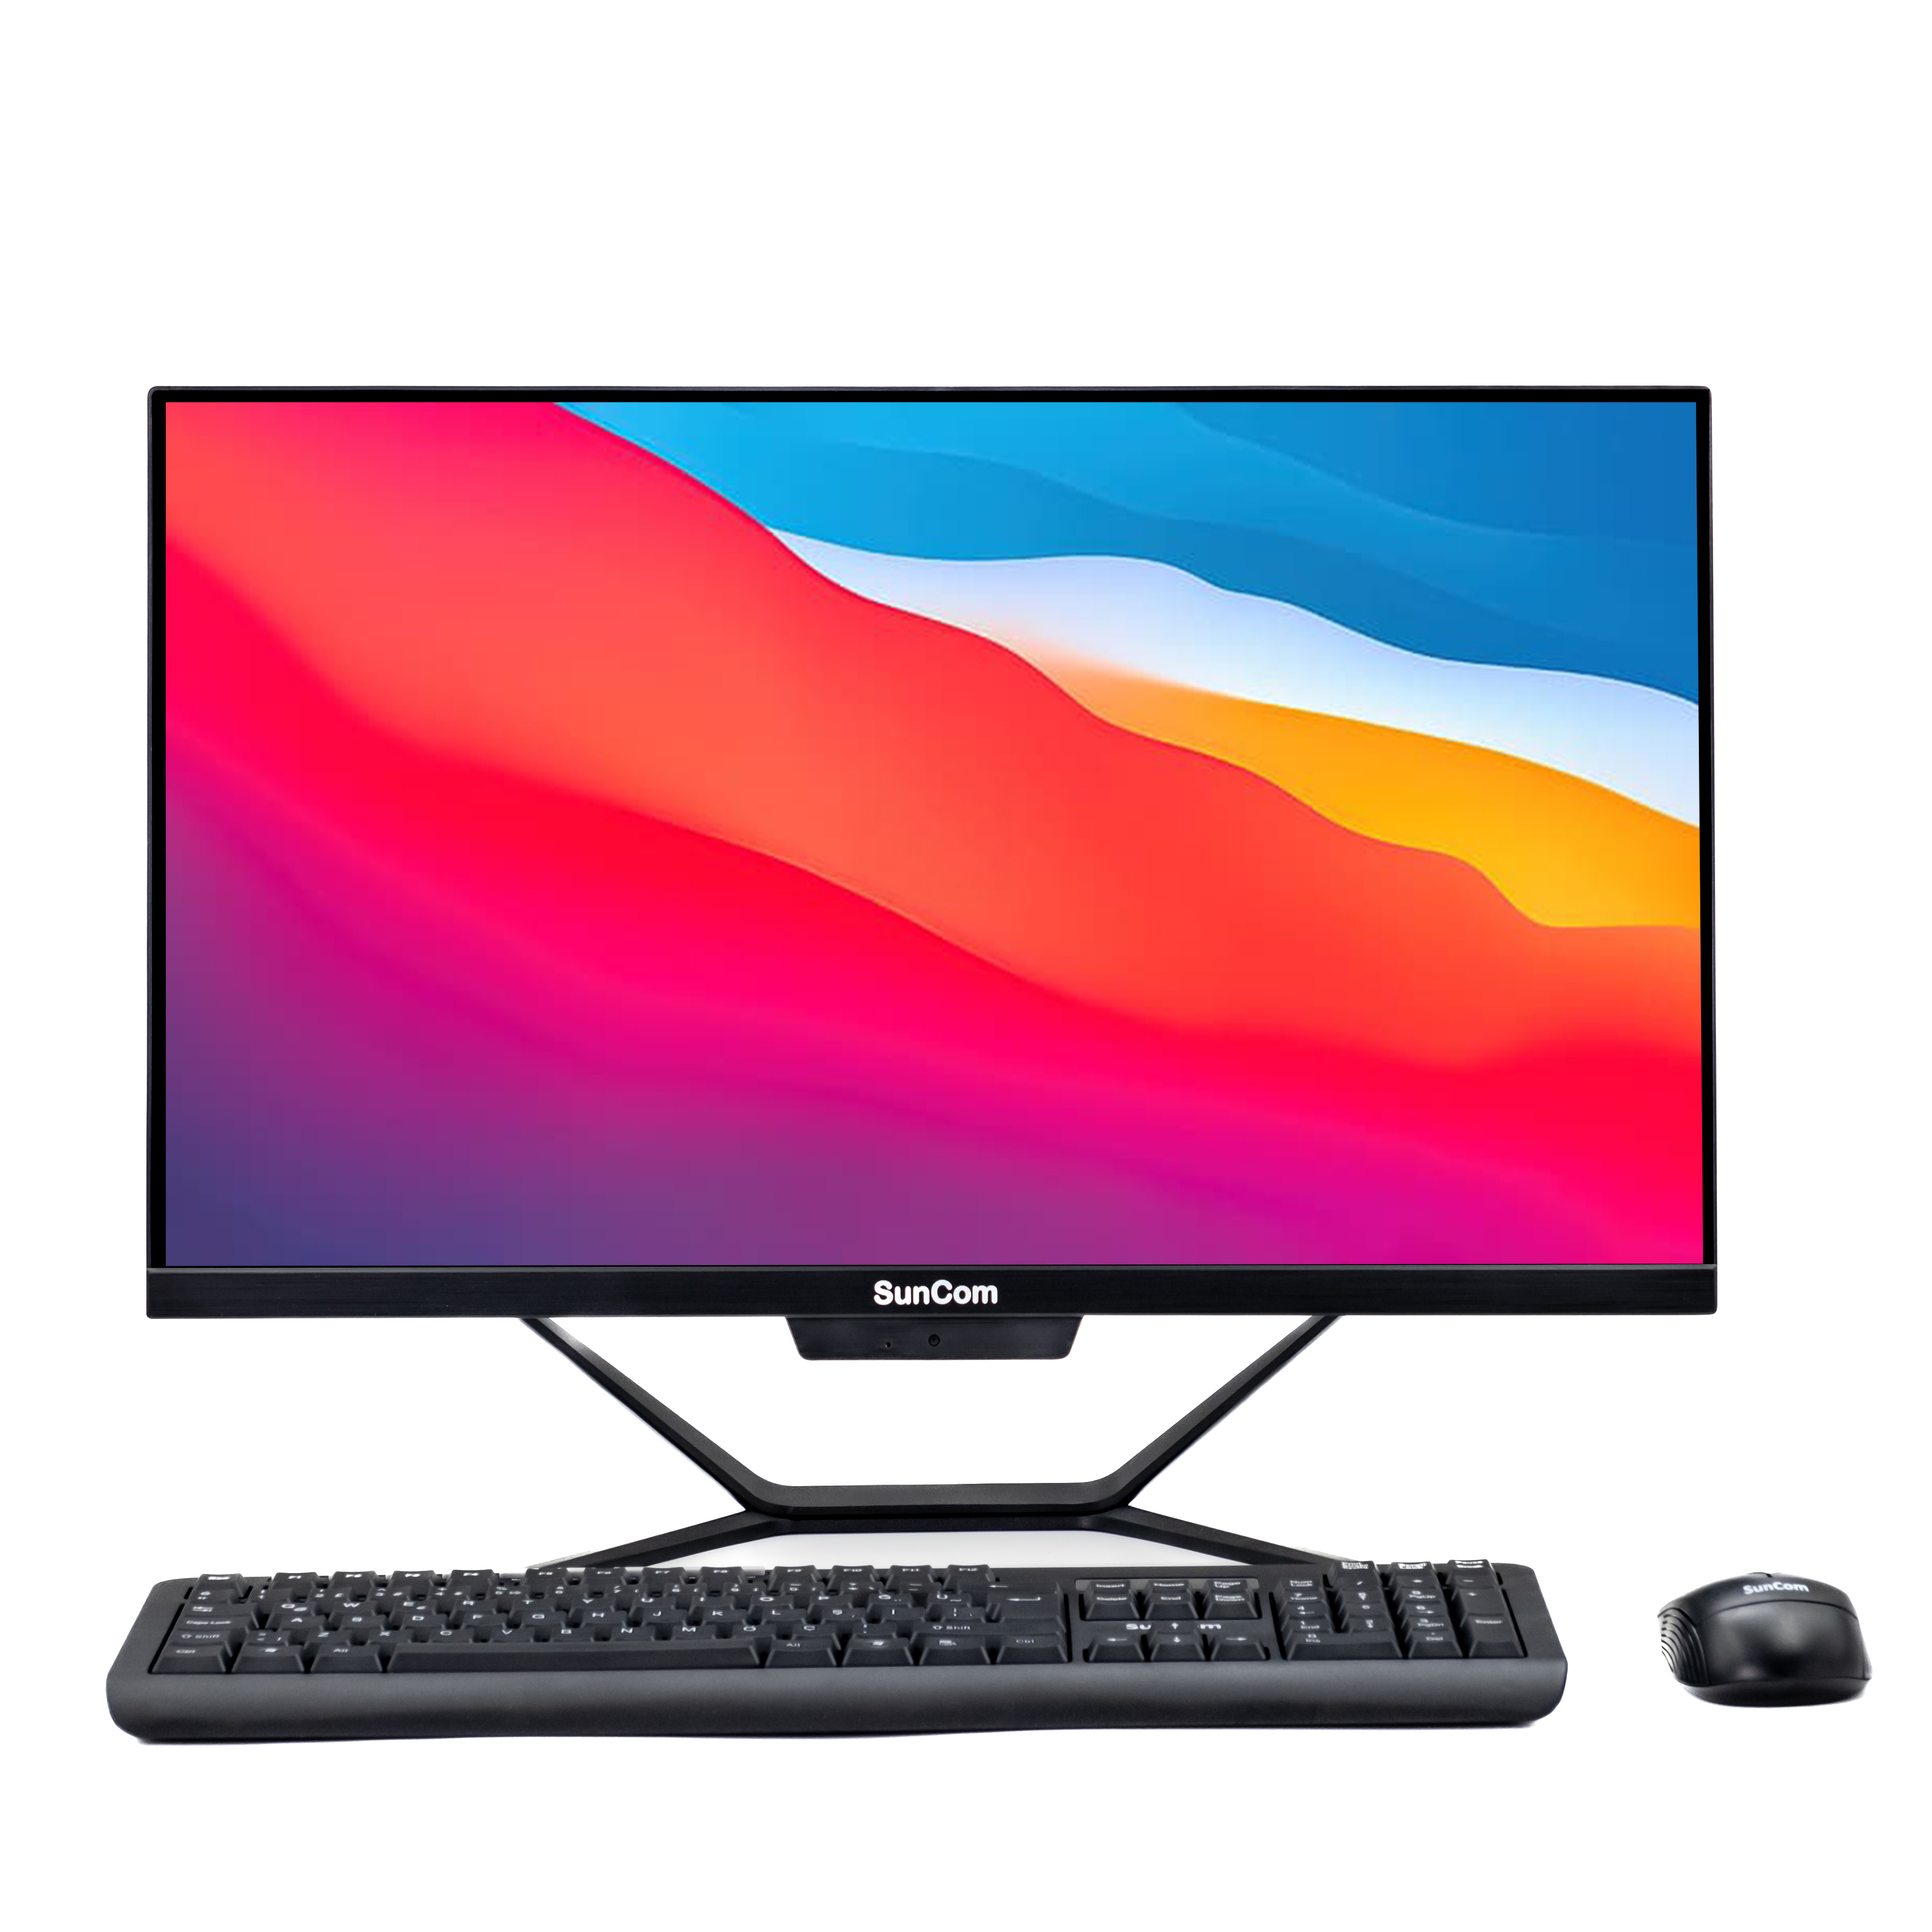 SUNCOM NEMESİS SCA-54585M23 I5-4570T 8GB 512 SSD 23.8" FHD IPS NONTOUCH FREE-DOS SIYAH ALL IN ONE PC